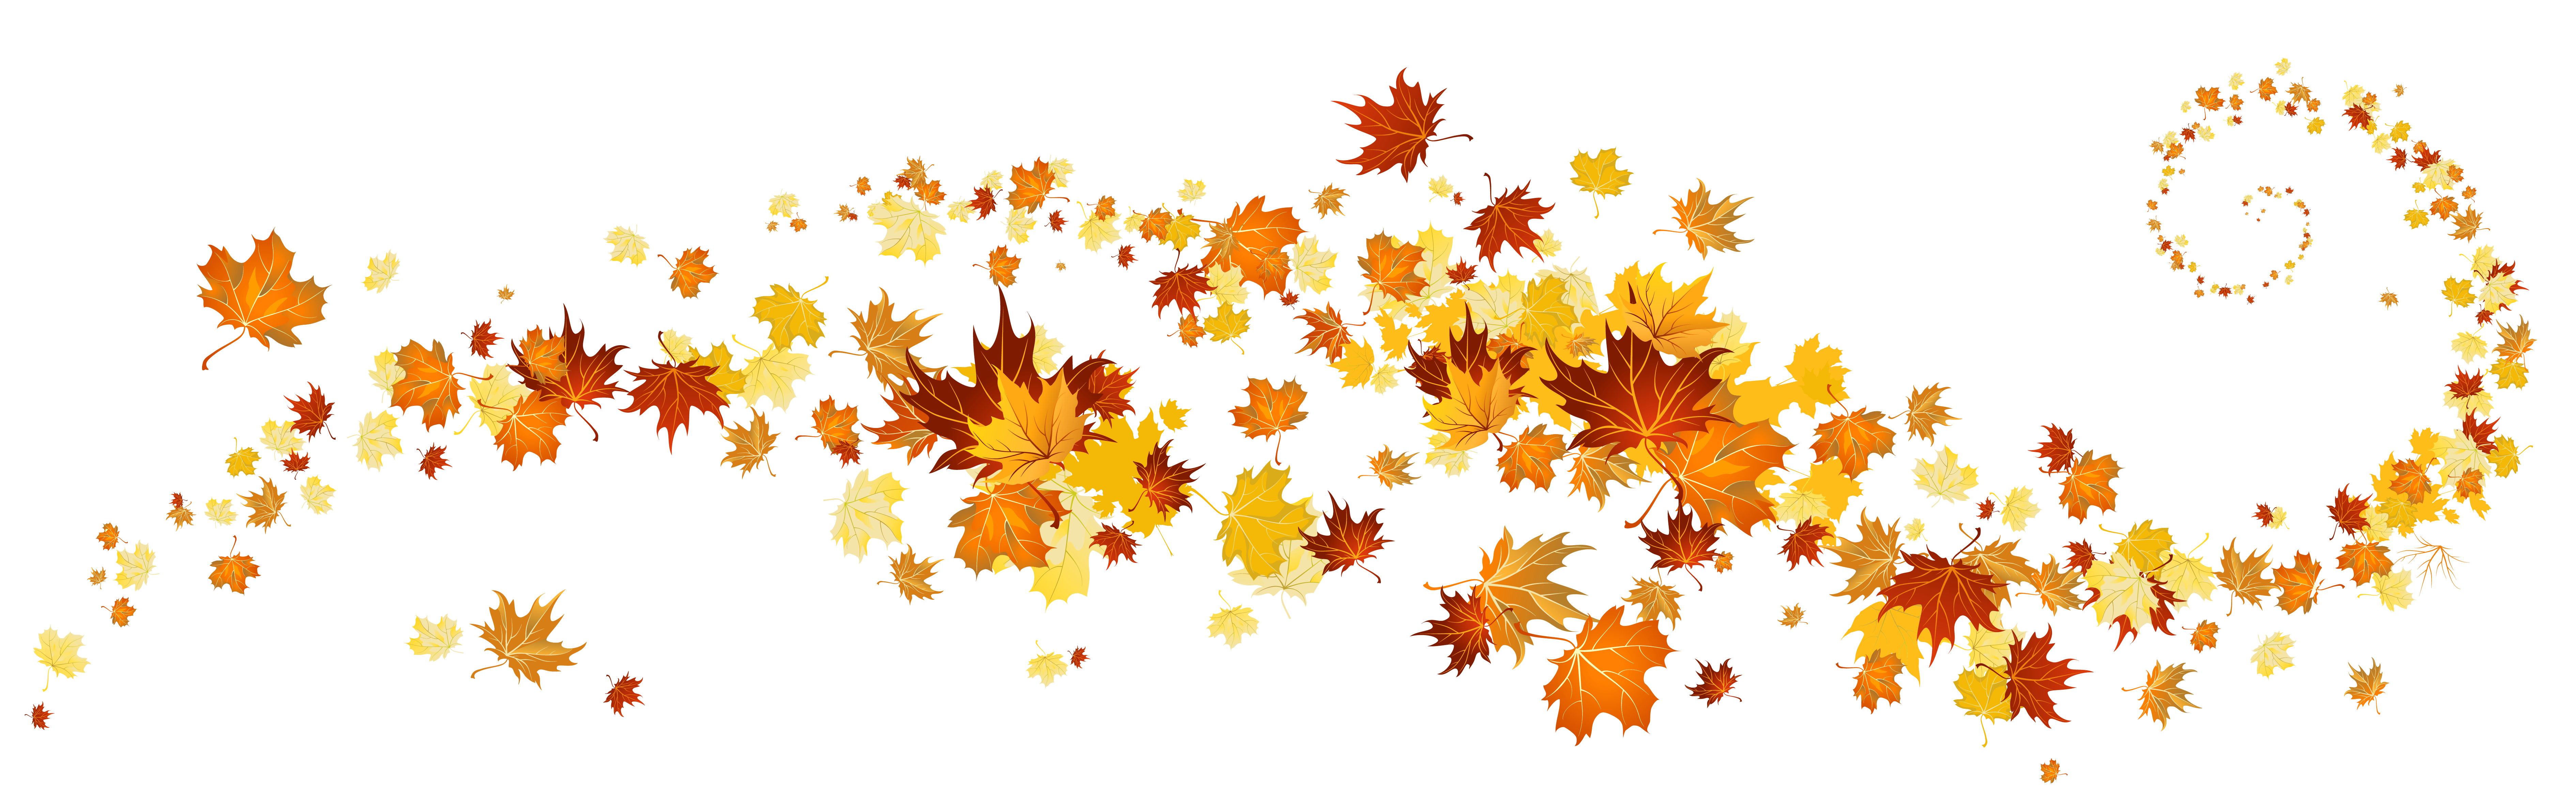 Autumn Fall Leaves Fall Leaf Outline Images Clipart